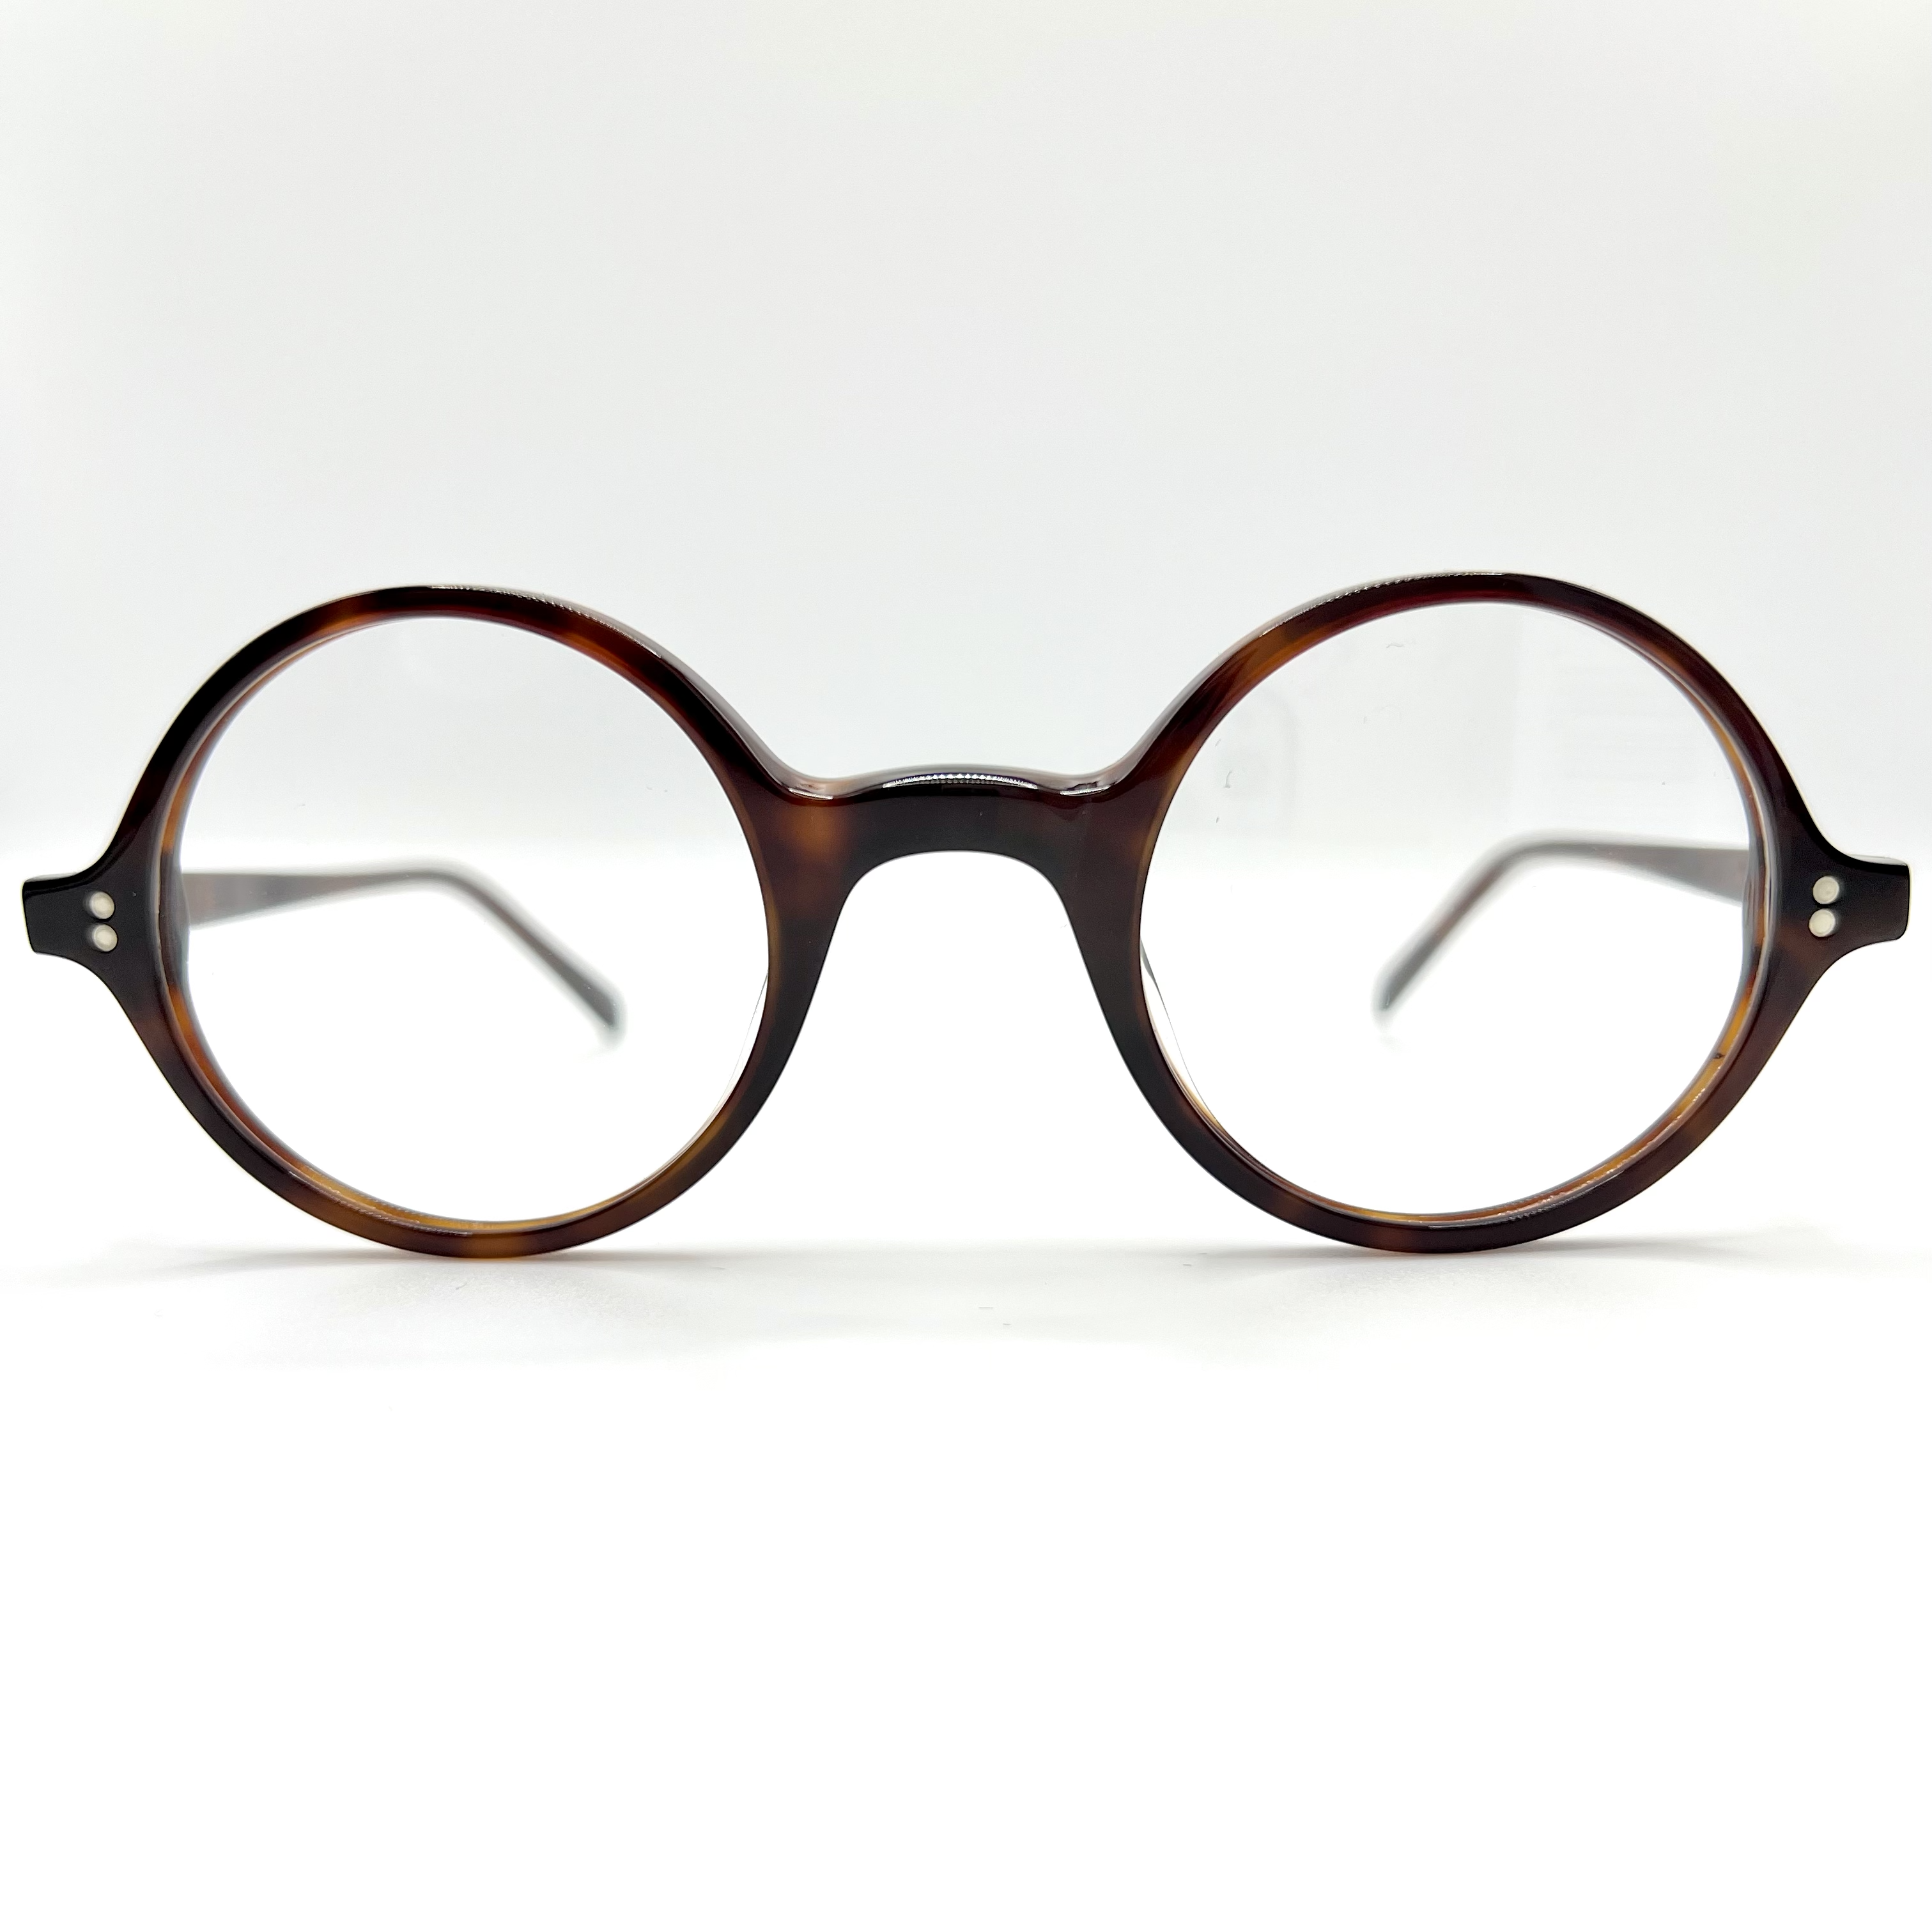 Old Focals Rounds in Gothic Tortoiseshell